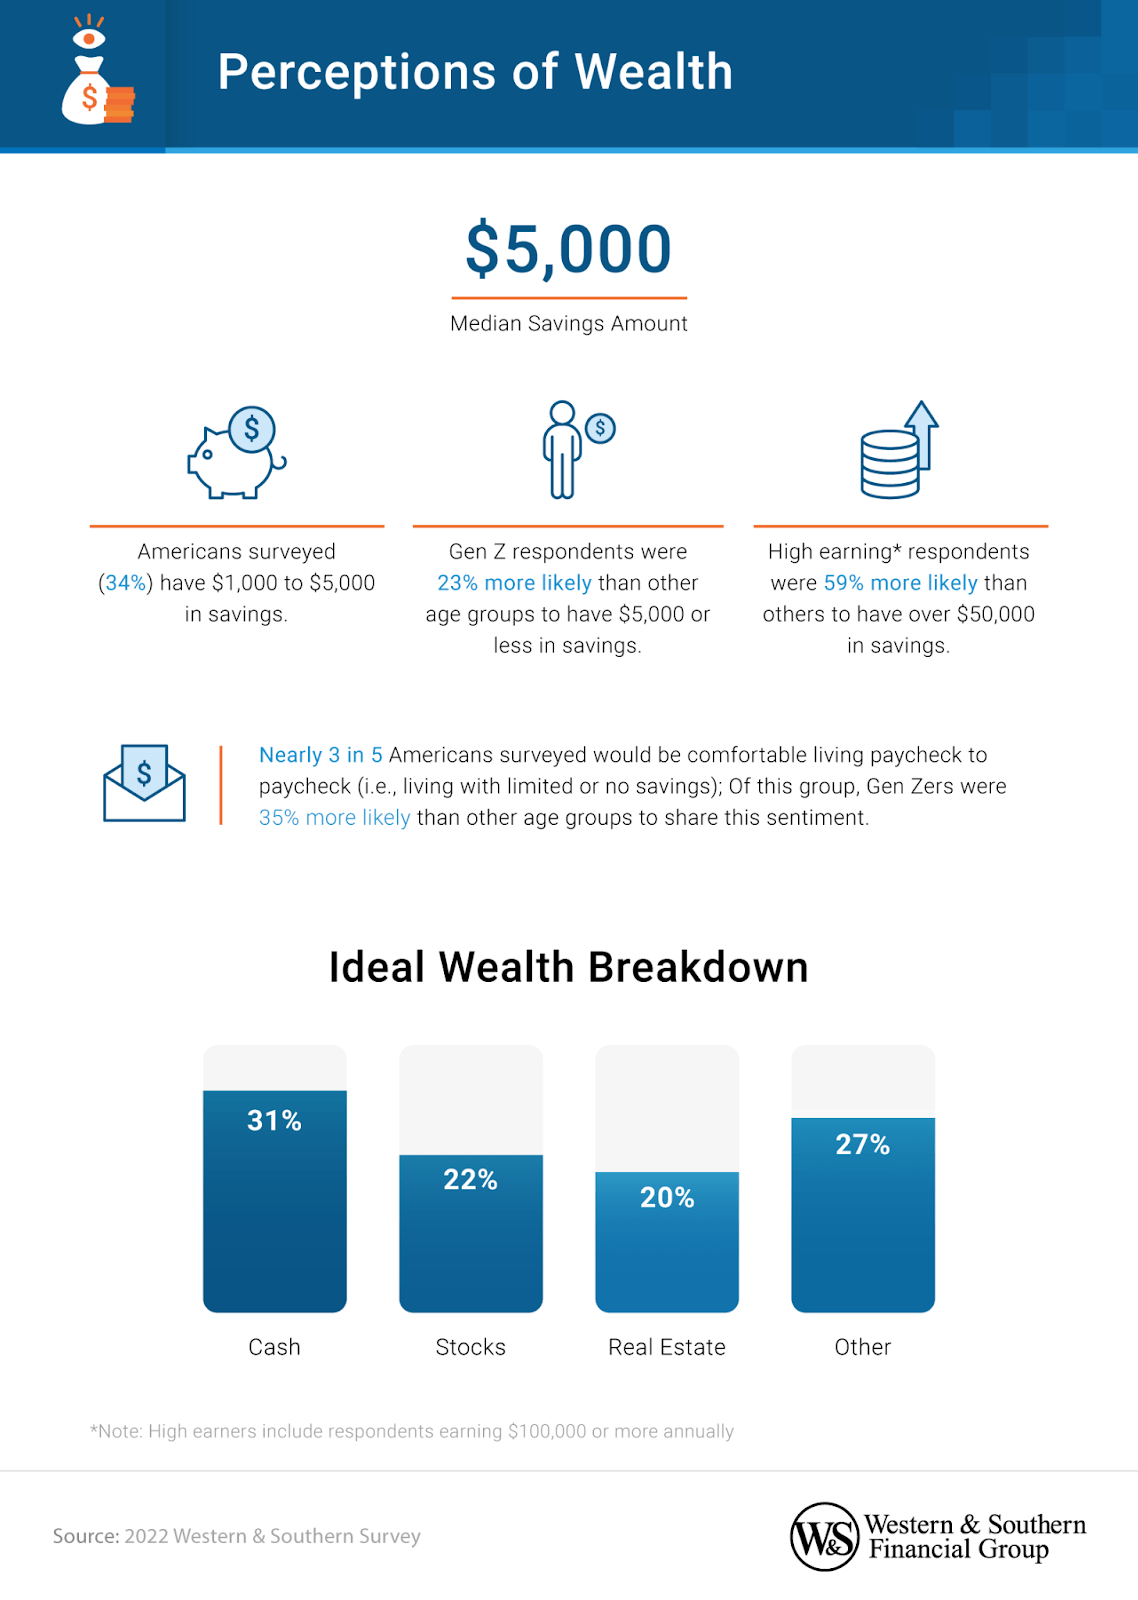 The most popular wealth-building strategy for Millennials is to budgeting focused on saving. 